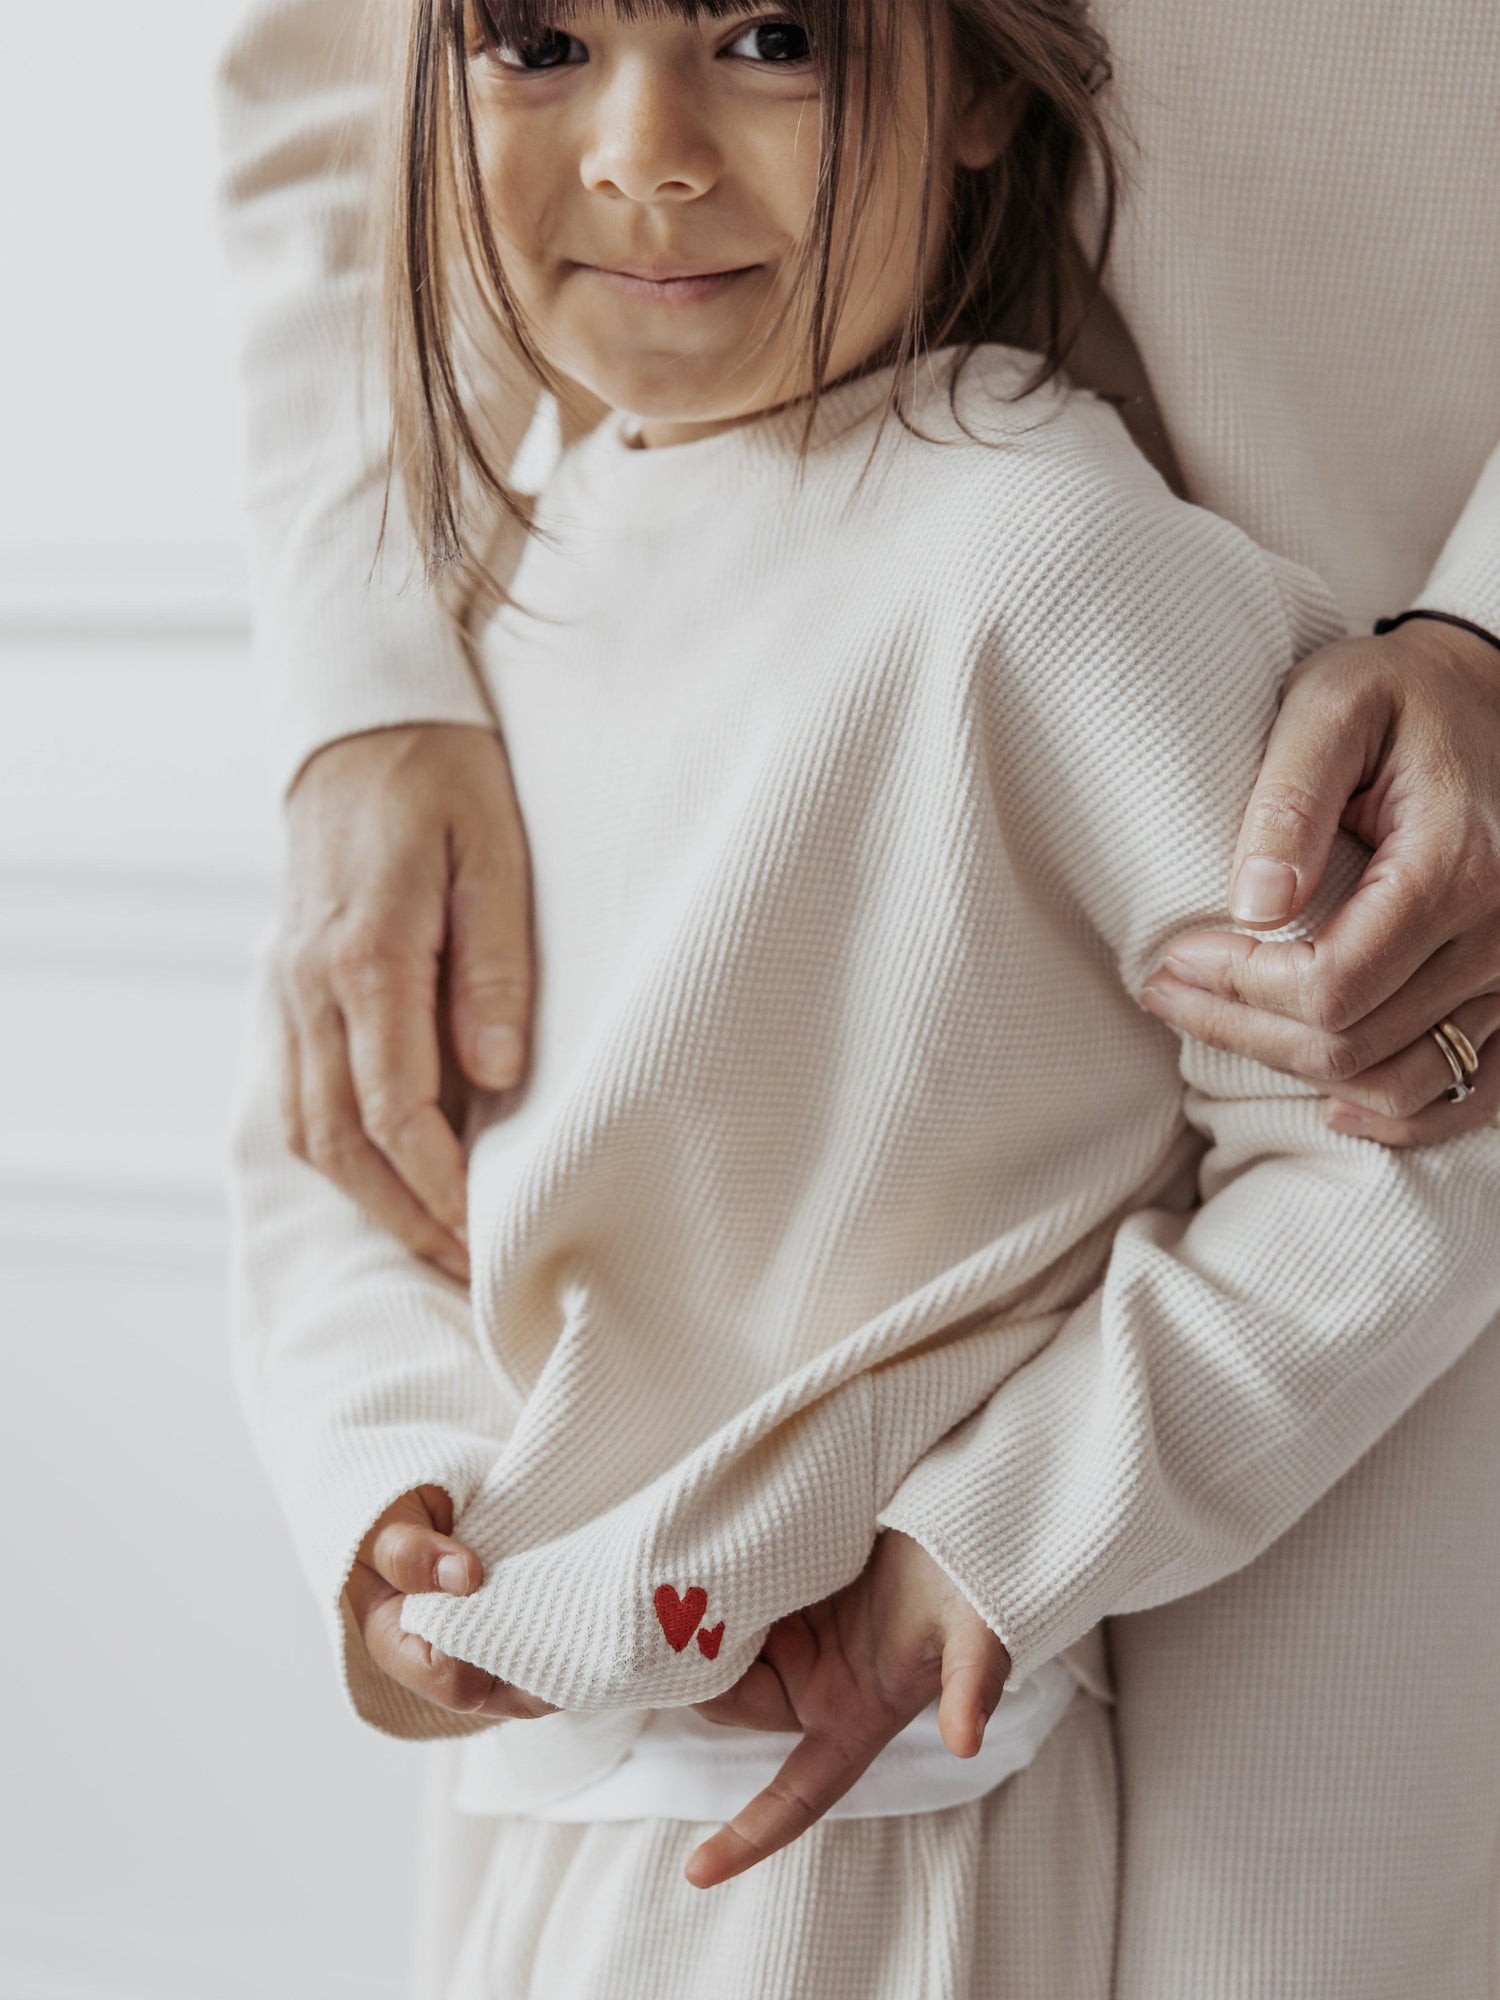 Matching Sweater Mini - The Little One • Family.Concept.Store. 